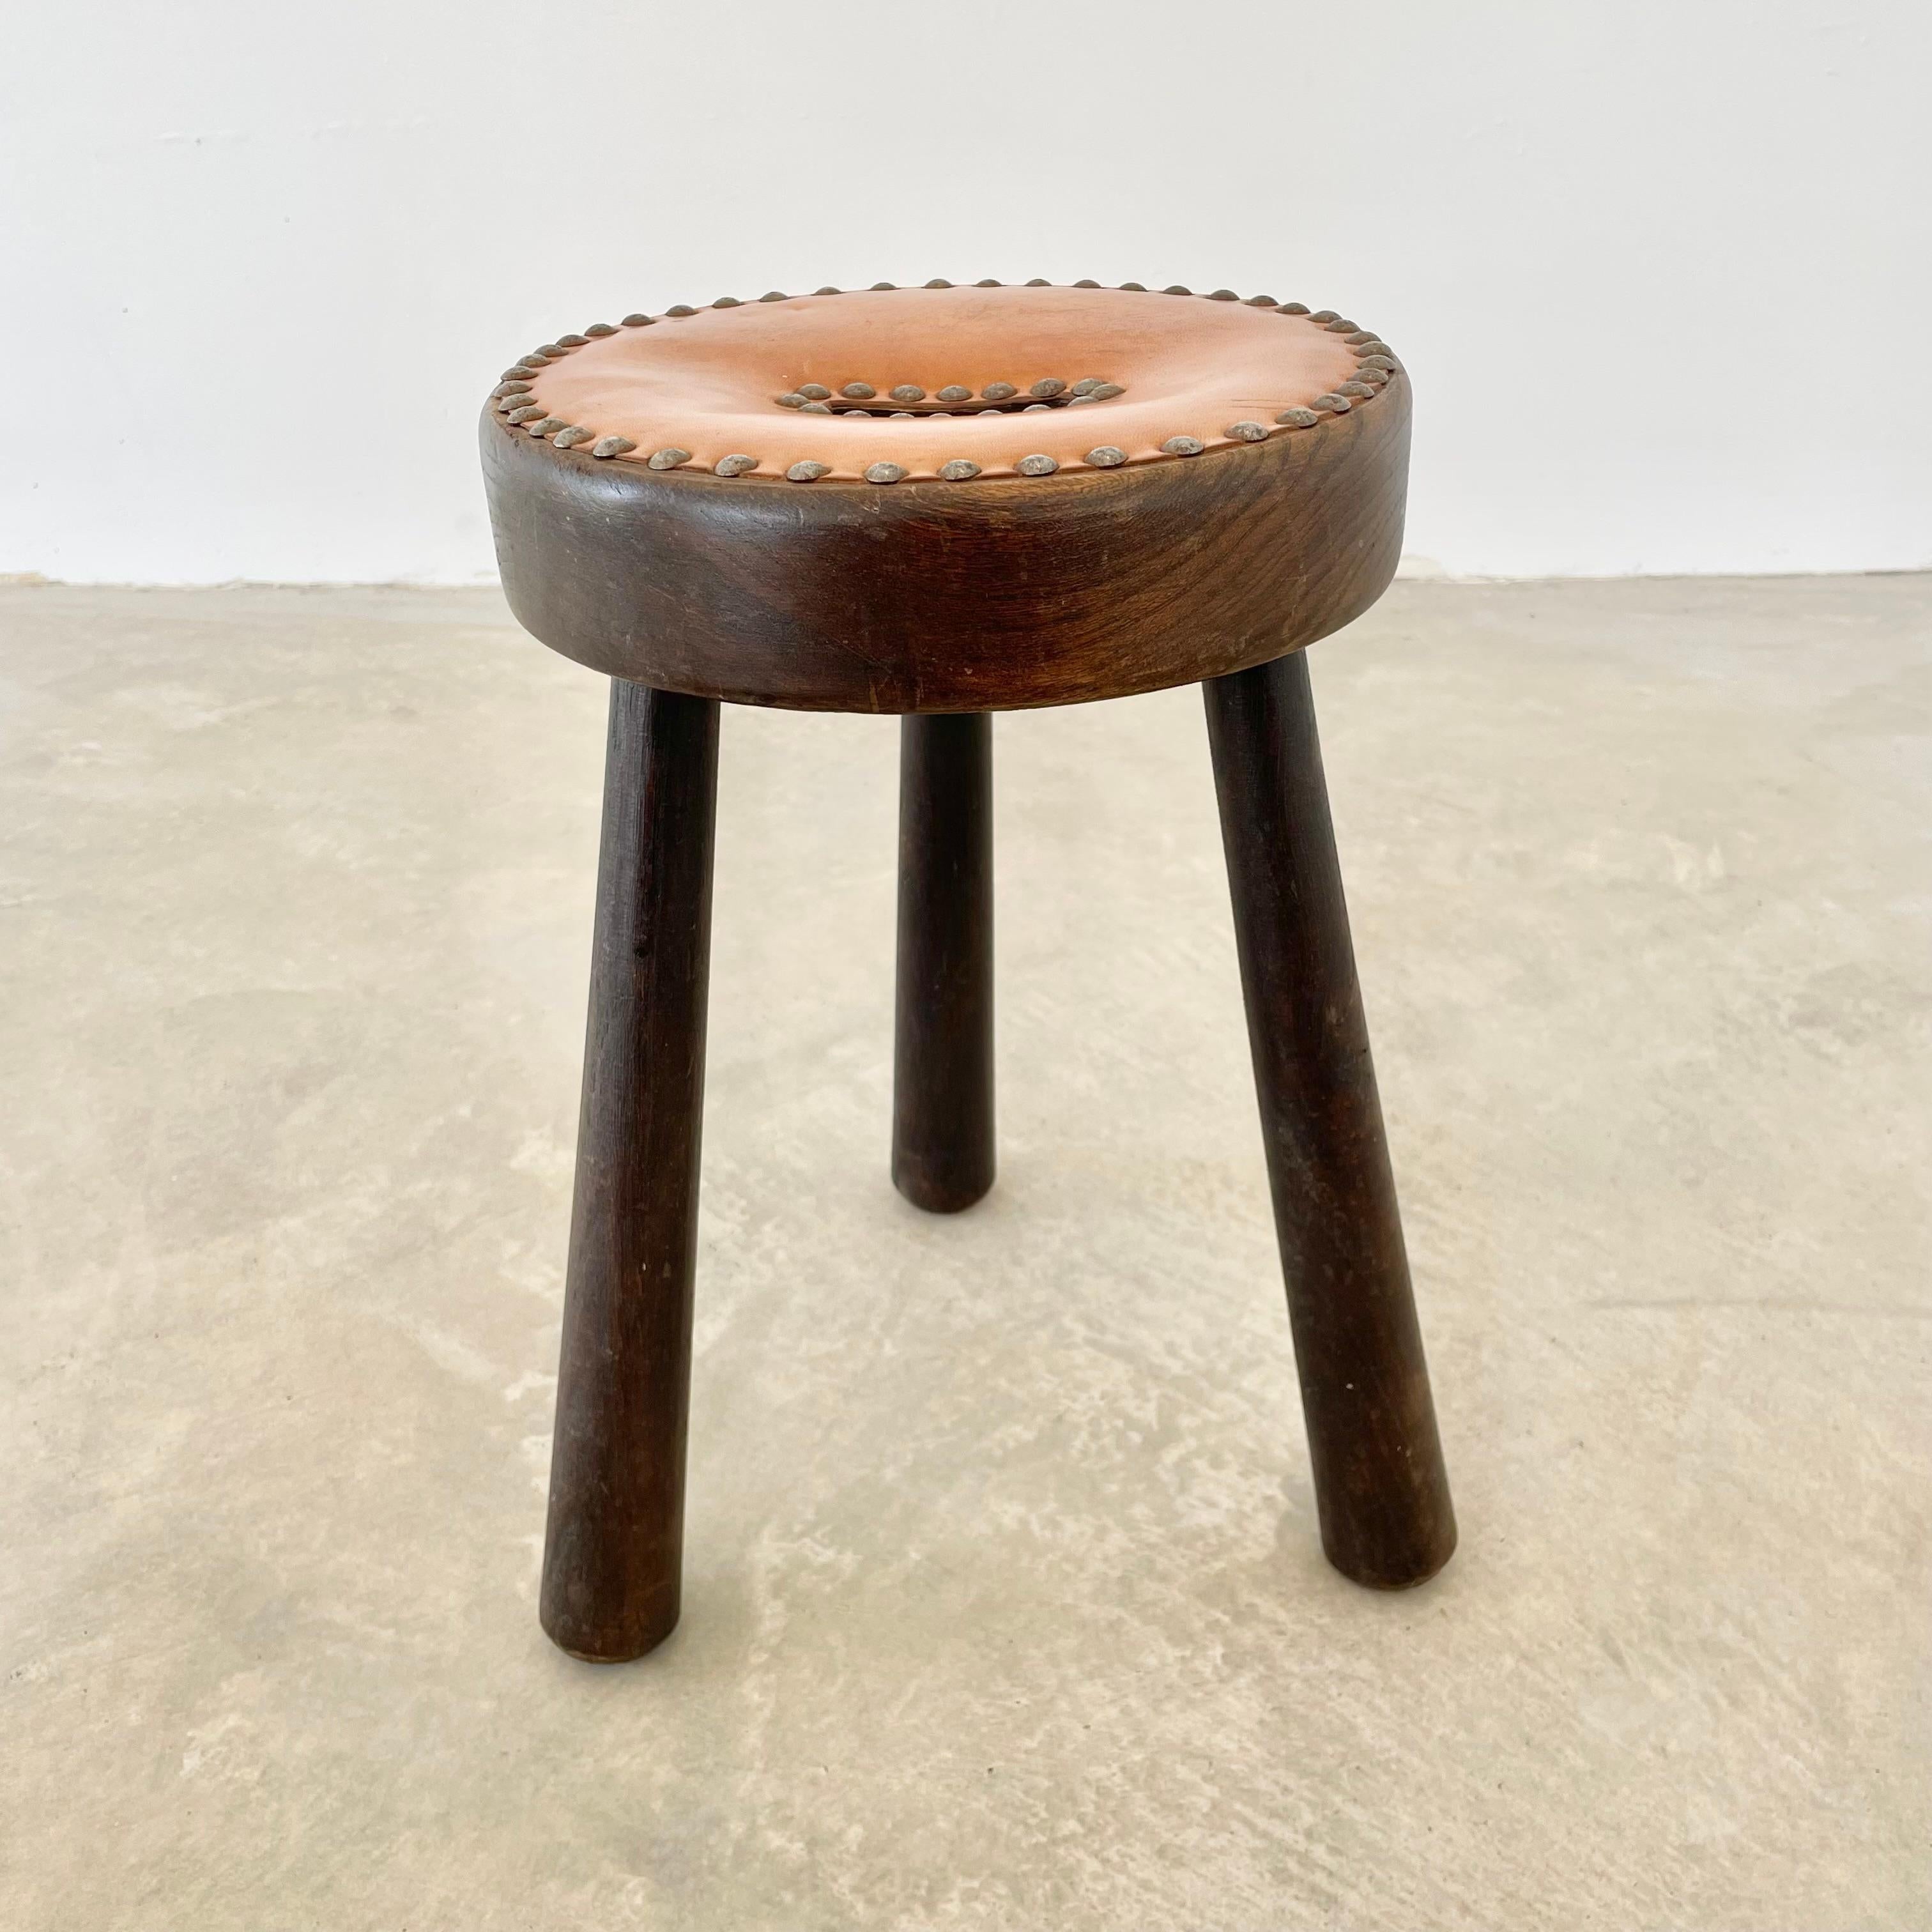 Leather and Wood Studded Stool, 1970s France For Sale 4